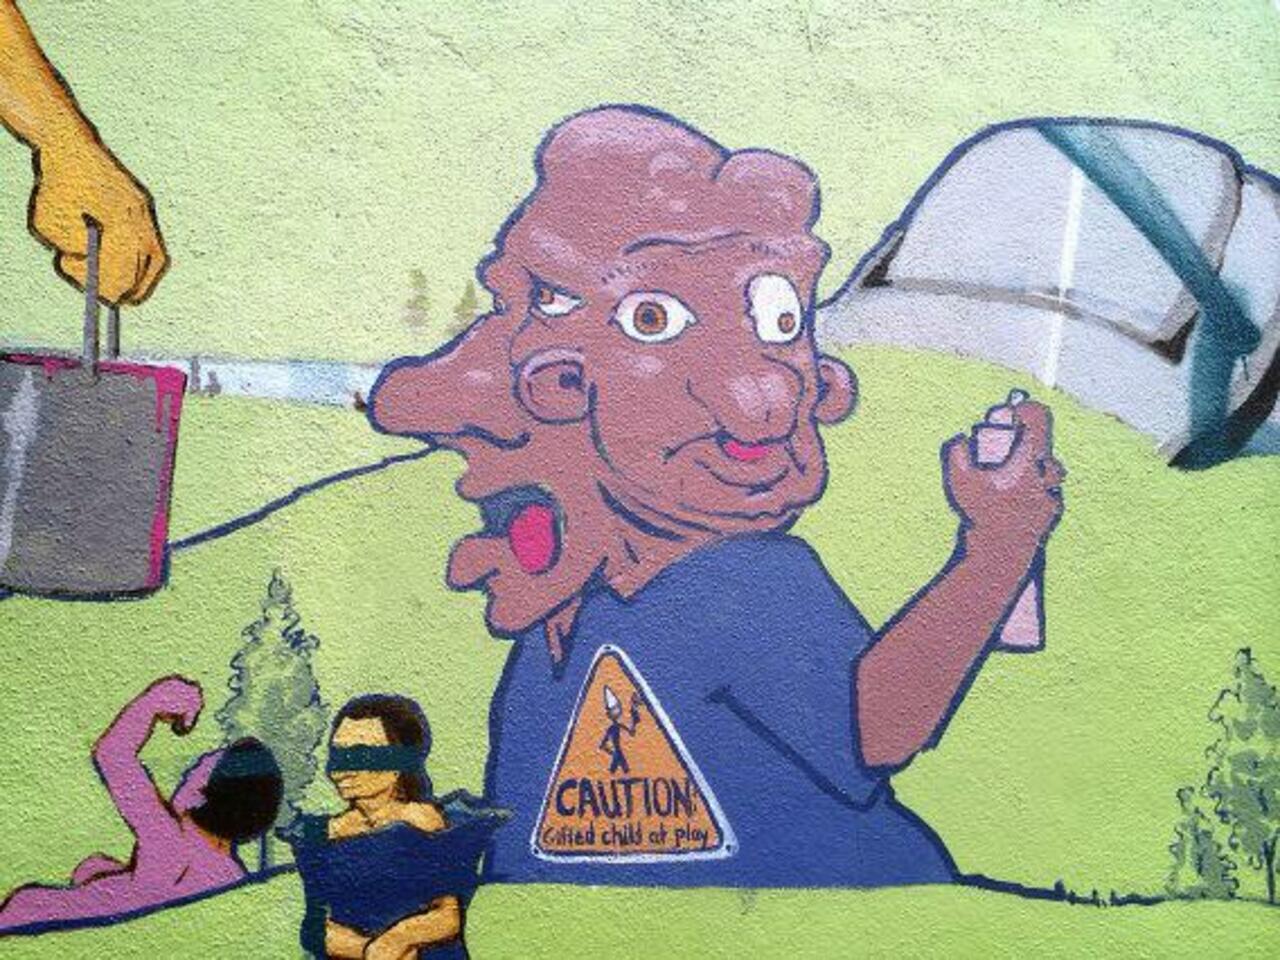 Spring is coming! "Gifted Child at Play" :-) #mural #eastvillage #graffiti #newyork #caution #watchout #art #public http://t.co/u27b4AvnHm